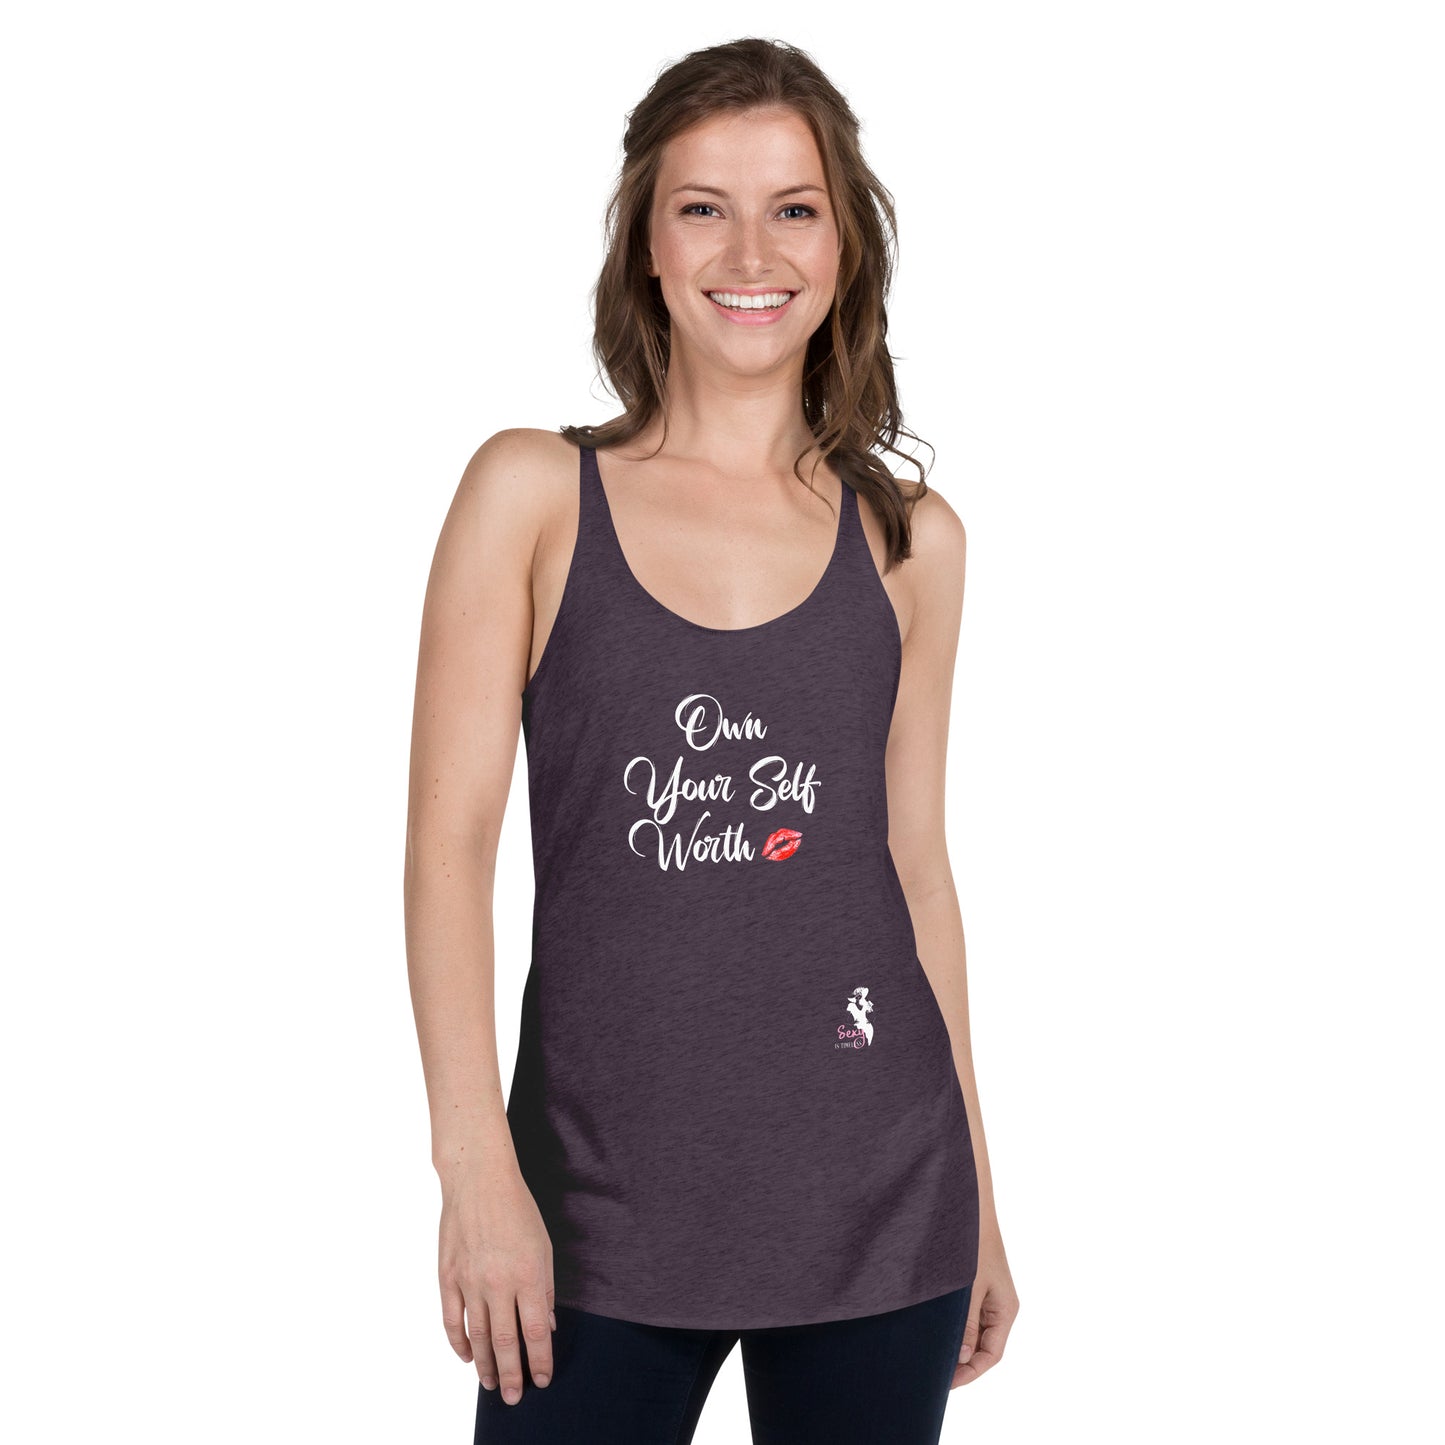 Women's Racerback Tank - Own your self worth - Colors